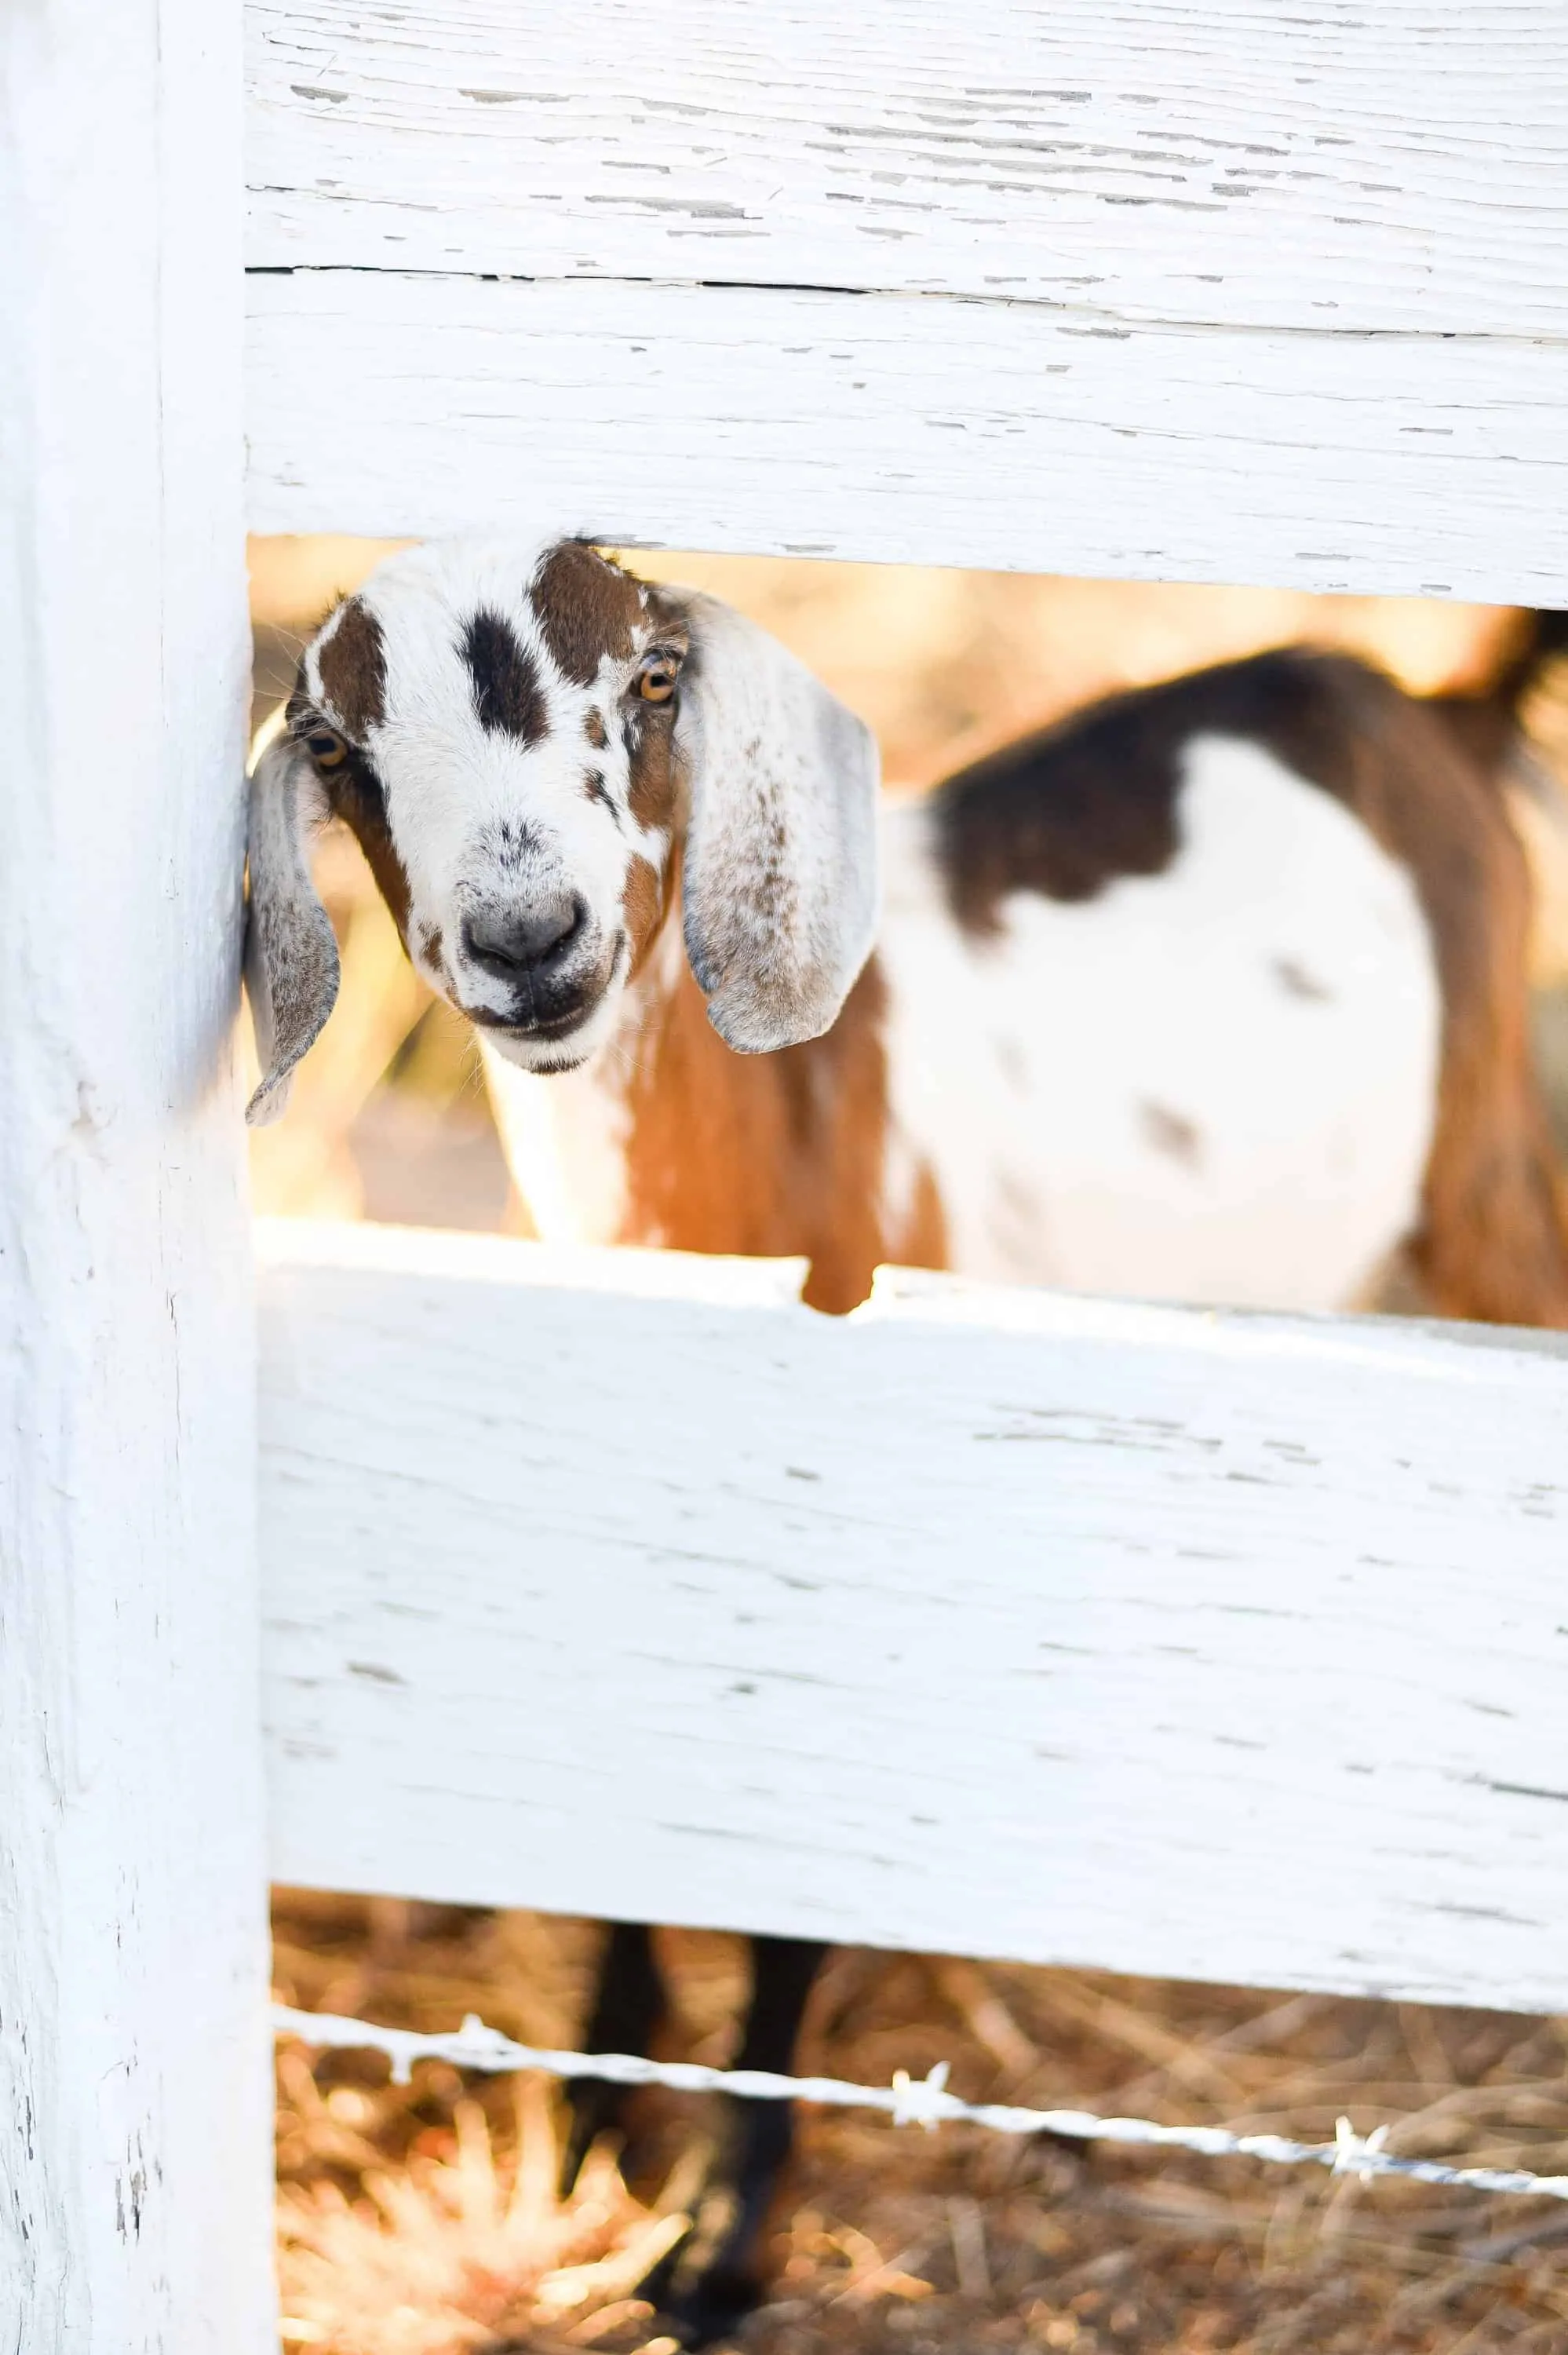 15 Things I Wish I Knew Before Getting Goats | However, it is a common misconception that goats are easy keepers - in fact, they are our most high maintenance animals. They require a close eye and lots of attention, so I thought it would be convenient to compile a list of things I wish I knew before we got goats - if you're considering getting goats, please, learn from my mistakes!  #goatcare #goats #goatlife #ranchlife #boxwoodavenue